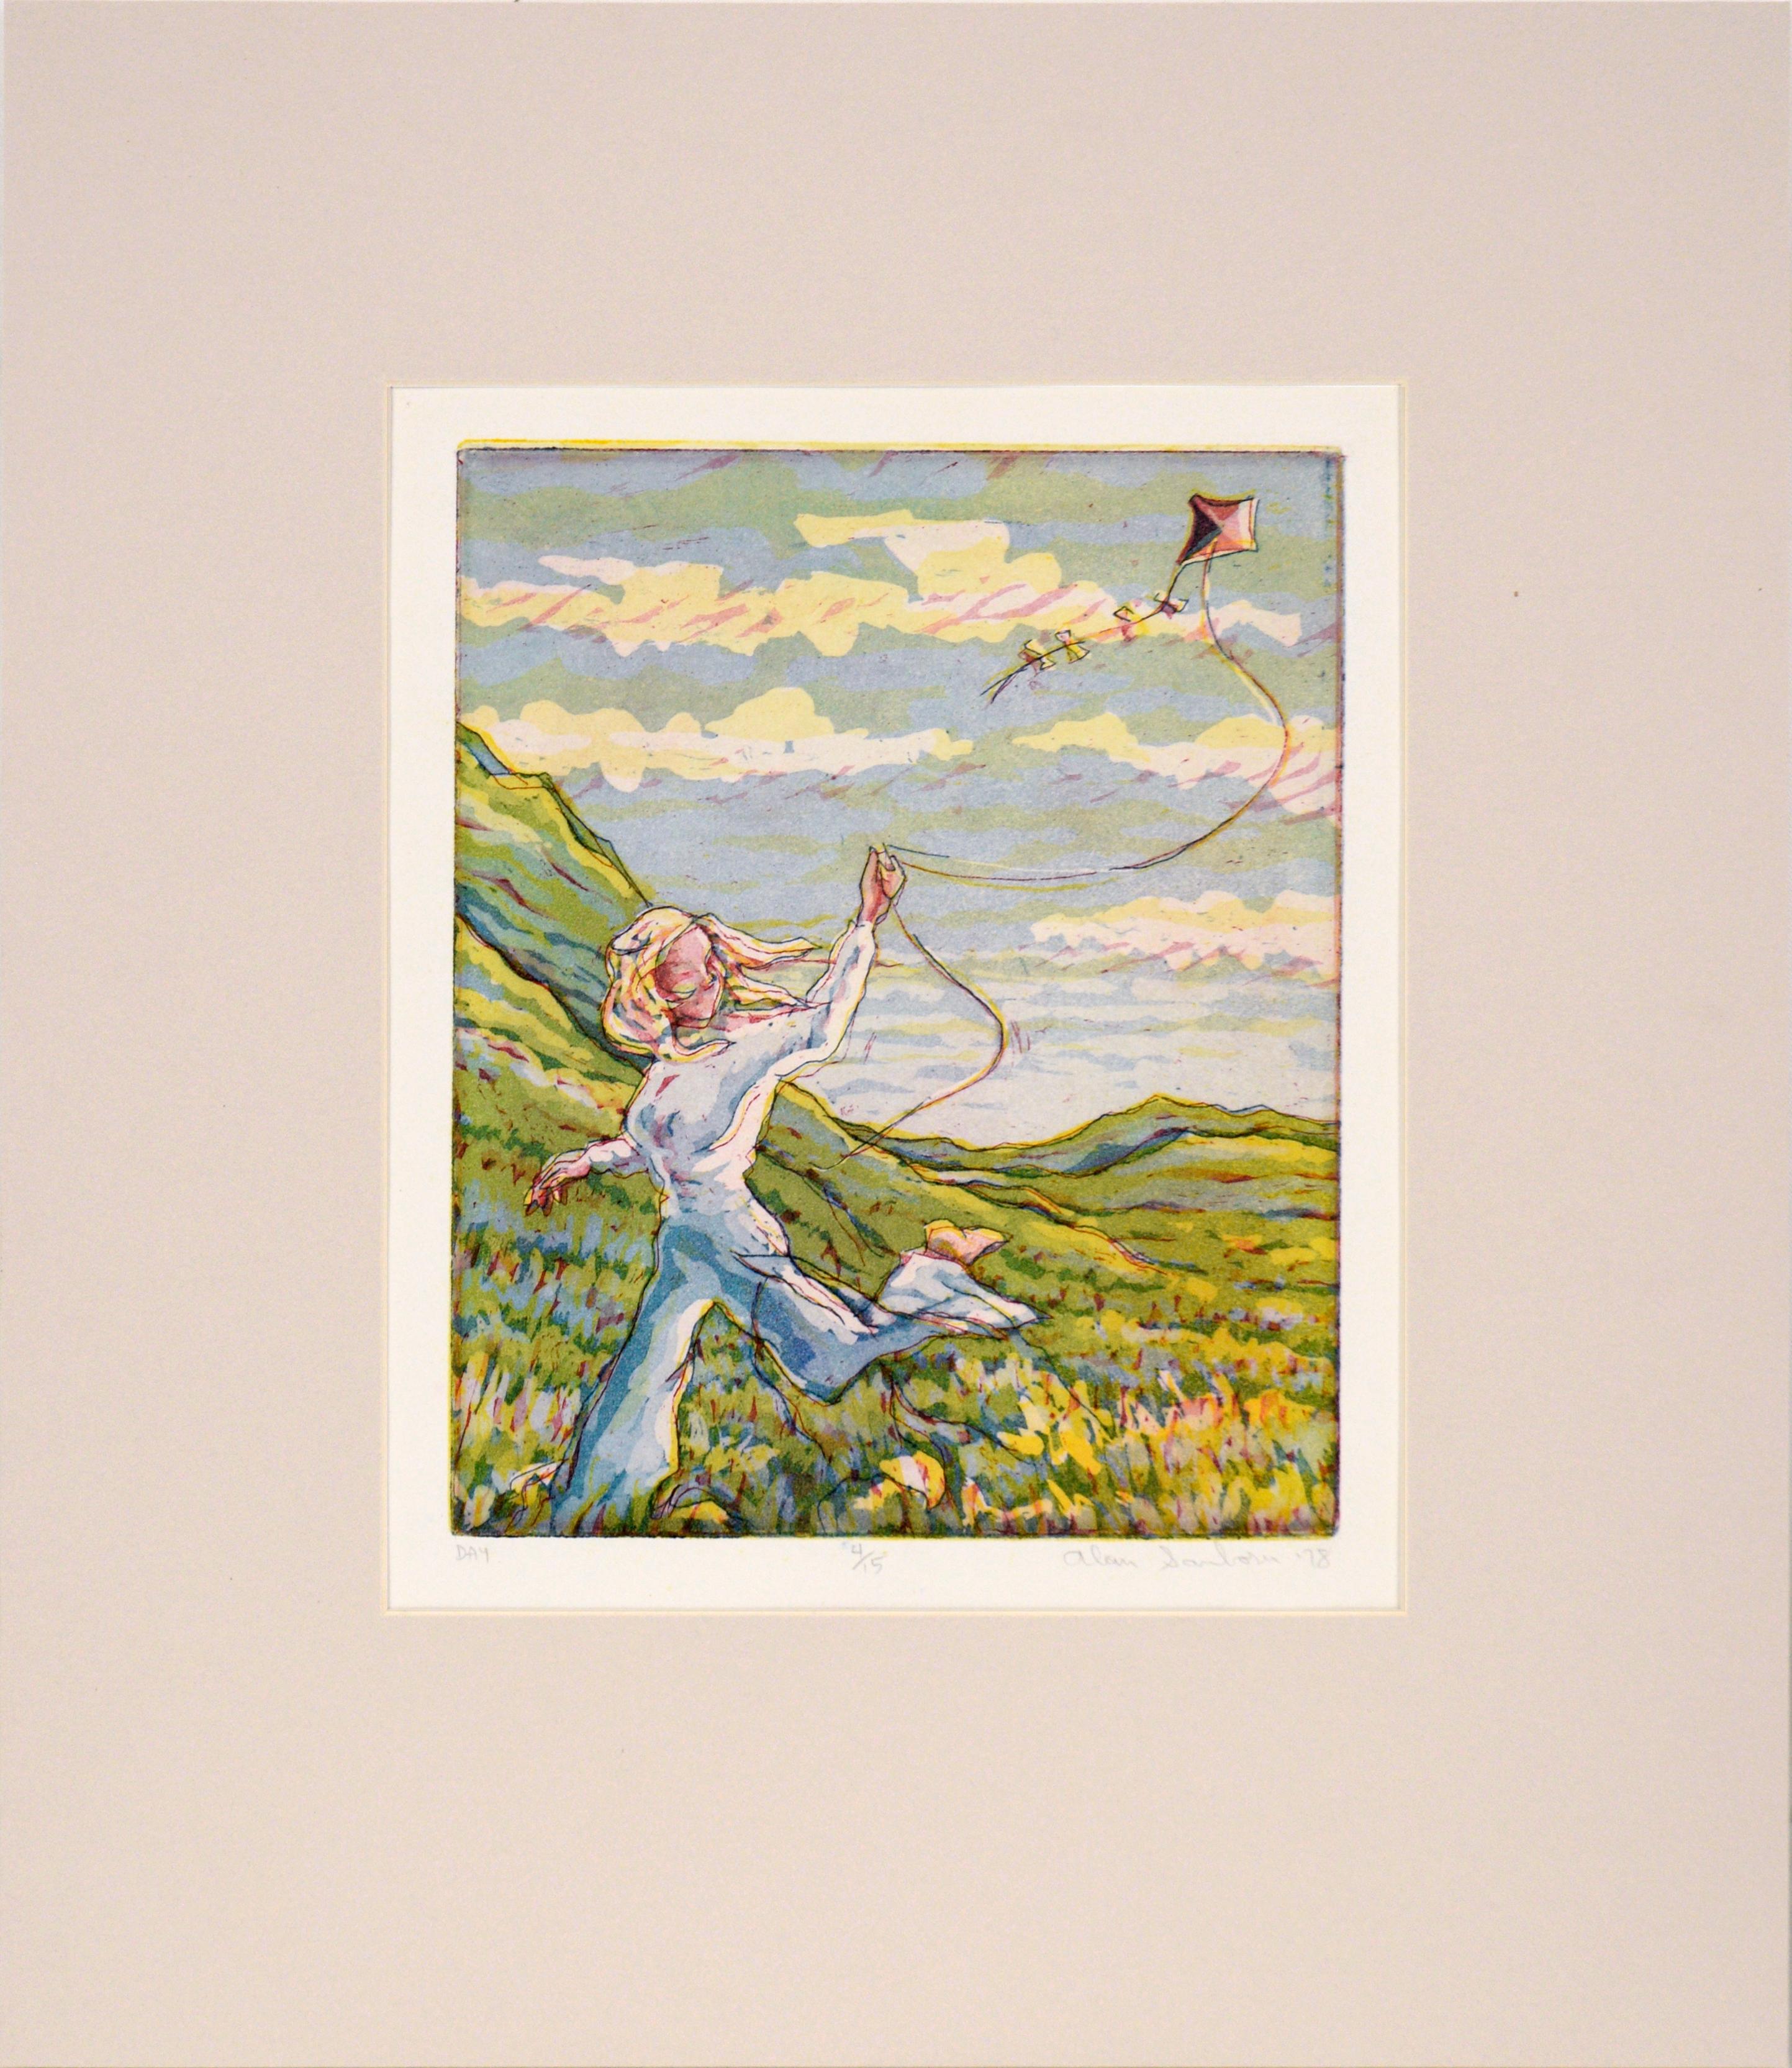 Alan Sanborn Landscape Print - Running Through the Field with a Kite - Multi Layer Etching on Paper